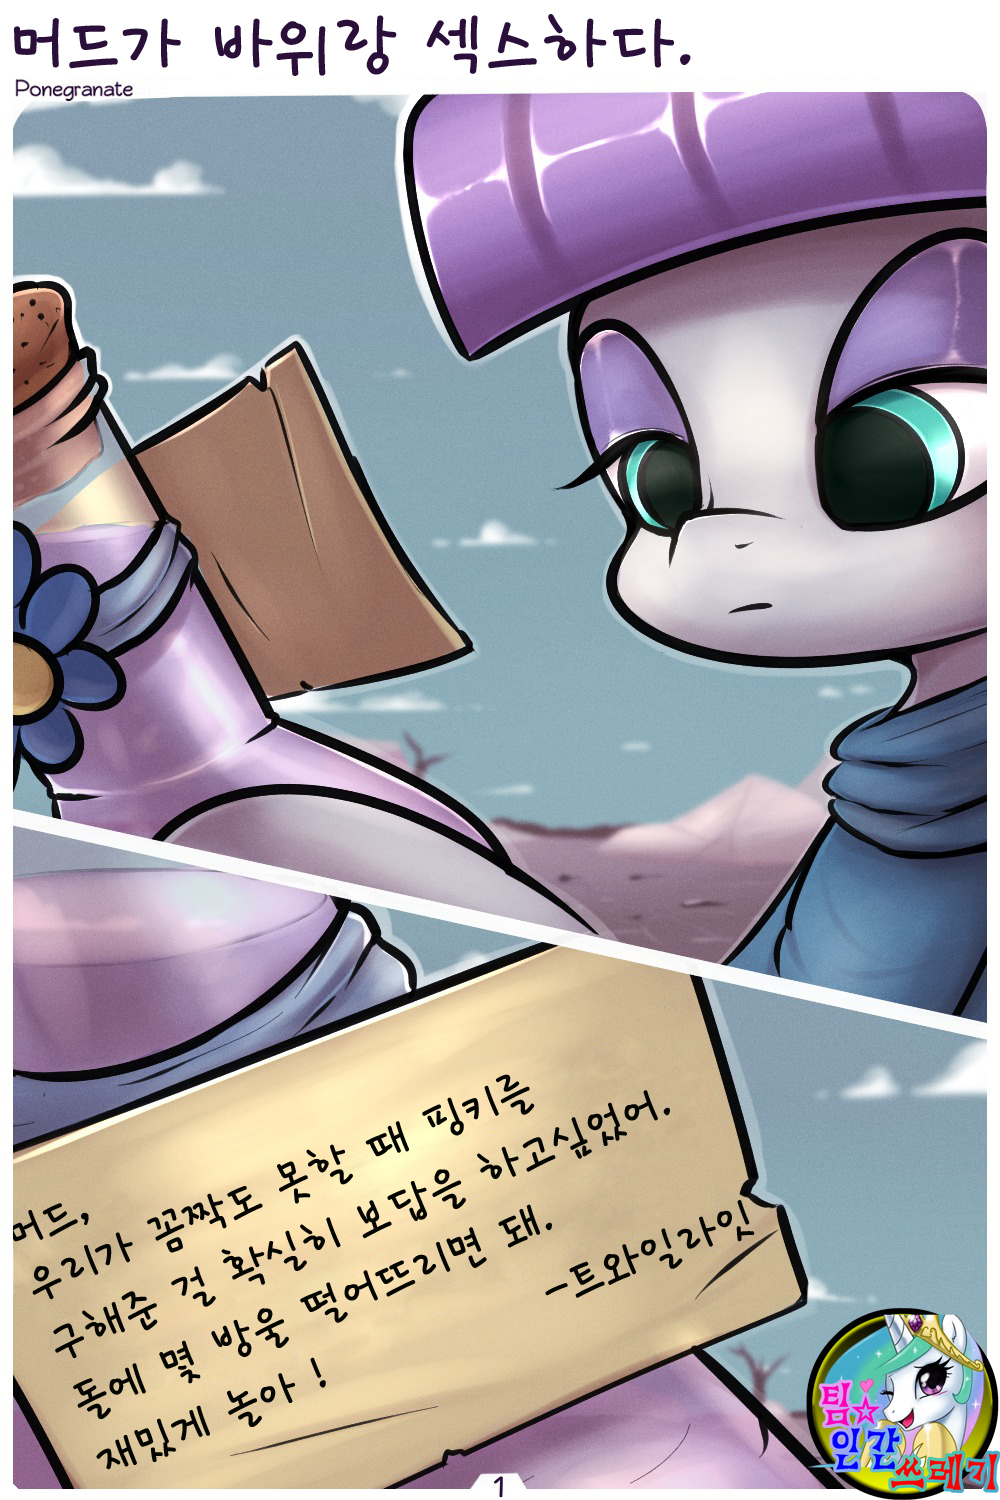 Maud Has Sex With a Rock My Little Pony Friendship is Magic korean00